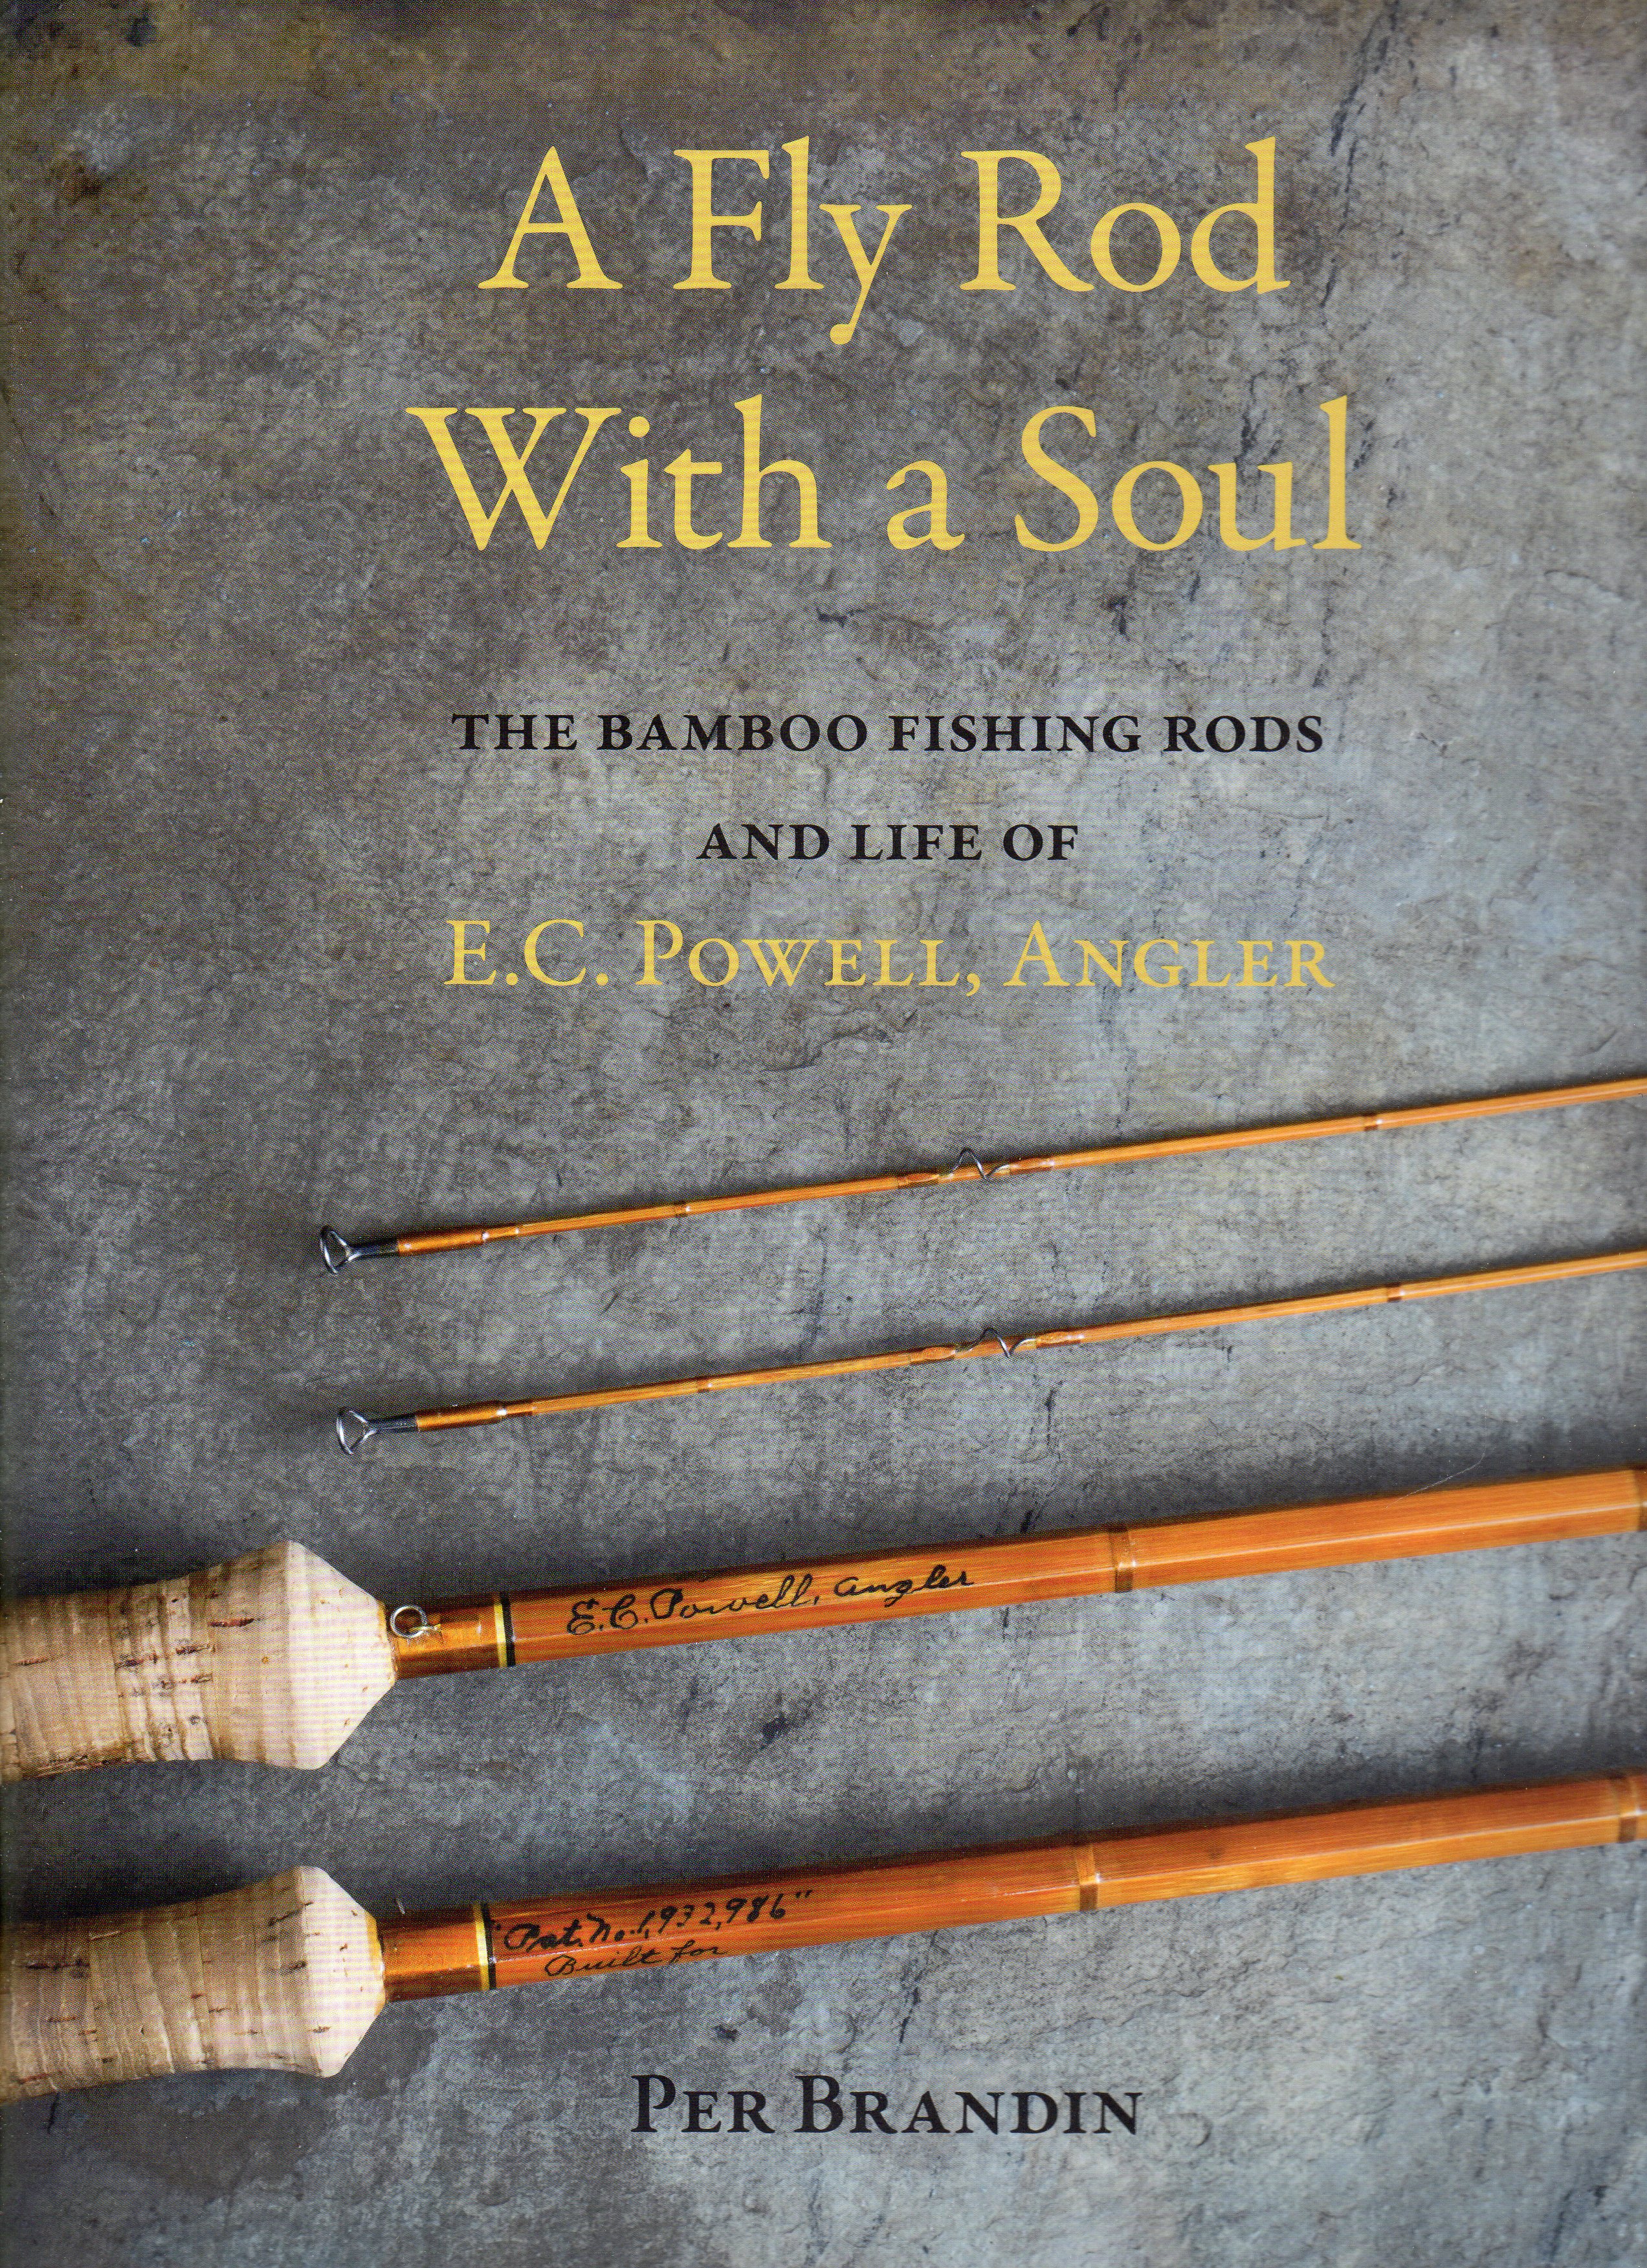 A Fly Rod With a Soul: The Bamboo Fishing Rods and Life of E.C. Powell,  Angler by Brandin, Per: New Hardcover (2020) 1st Edition